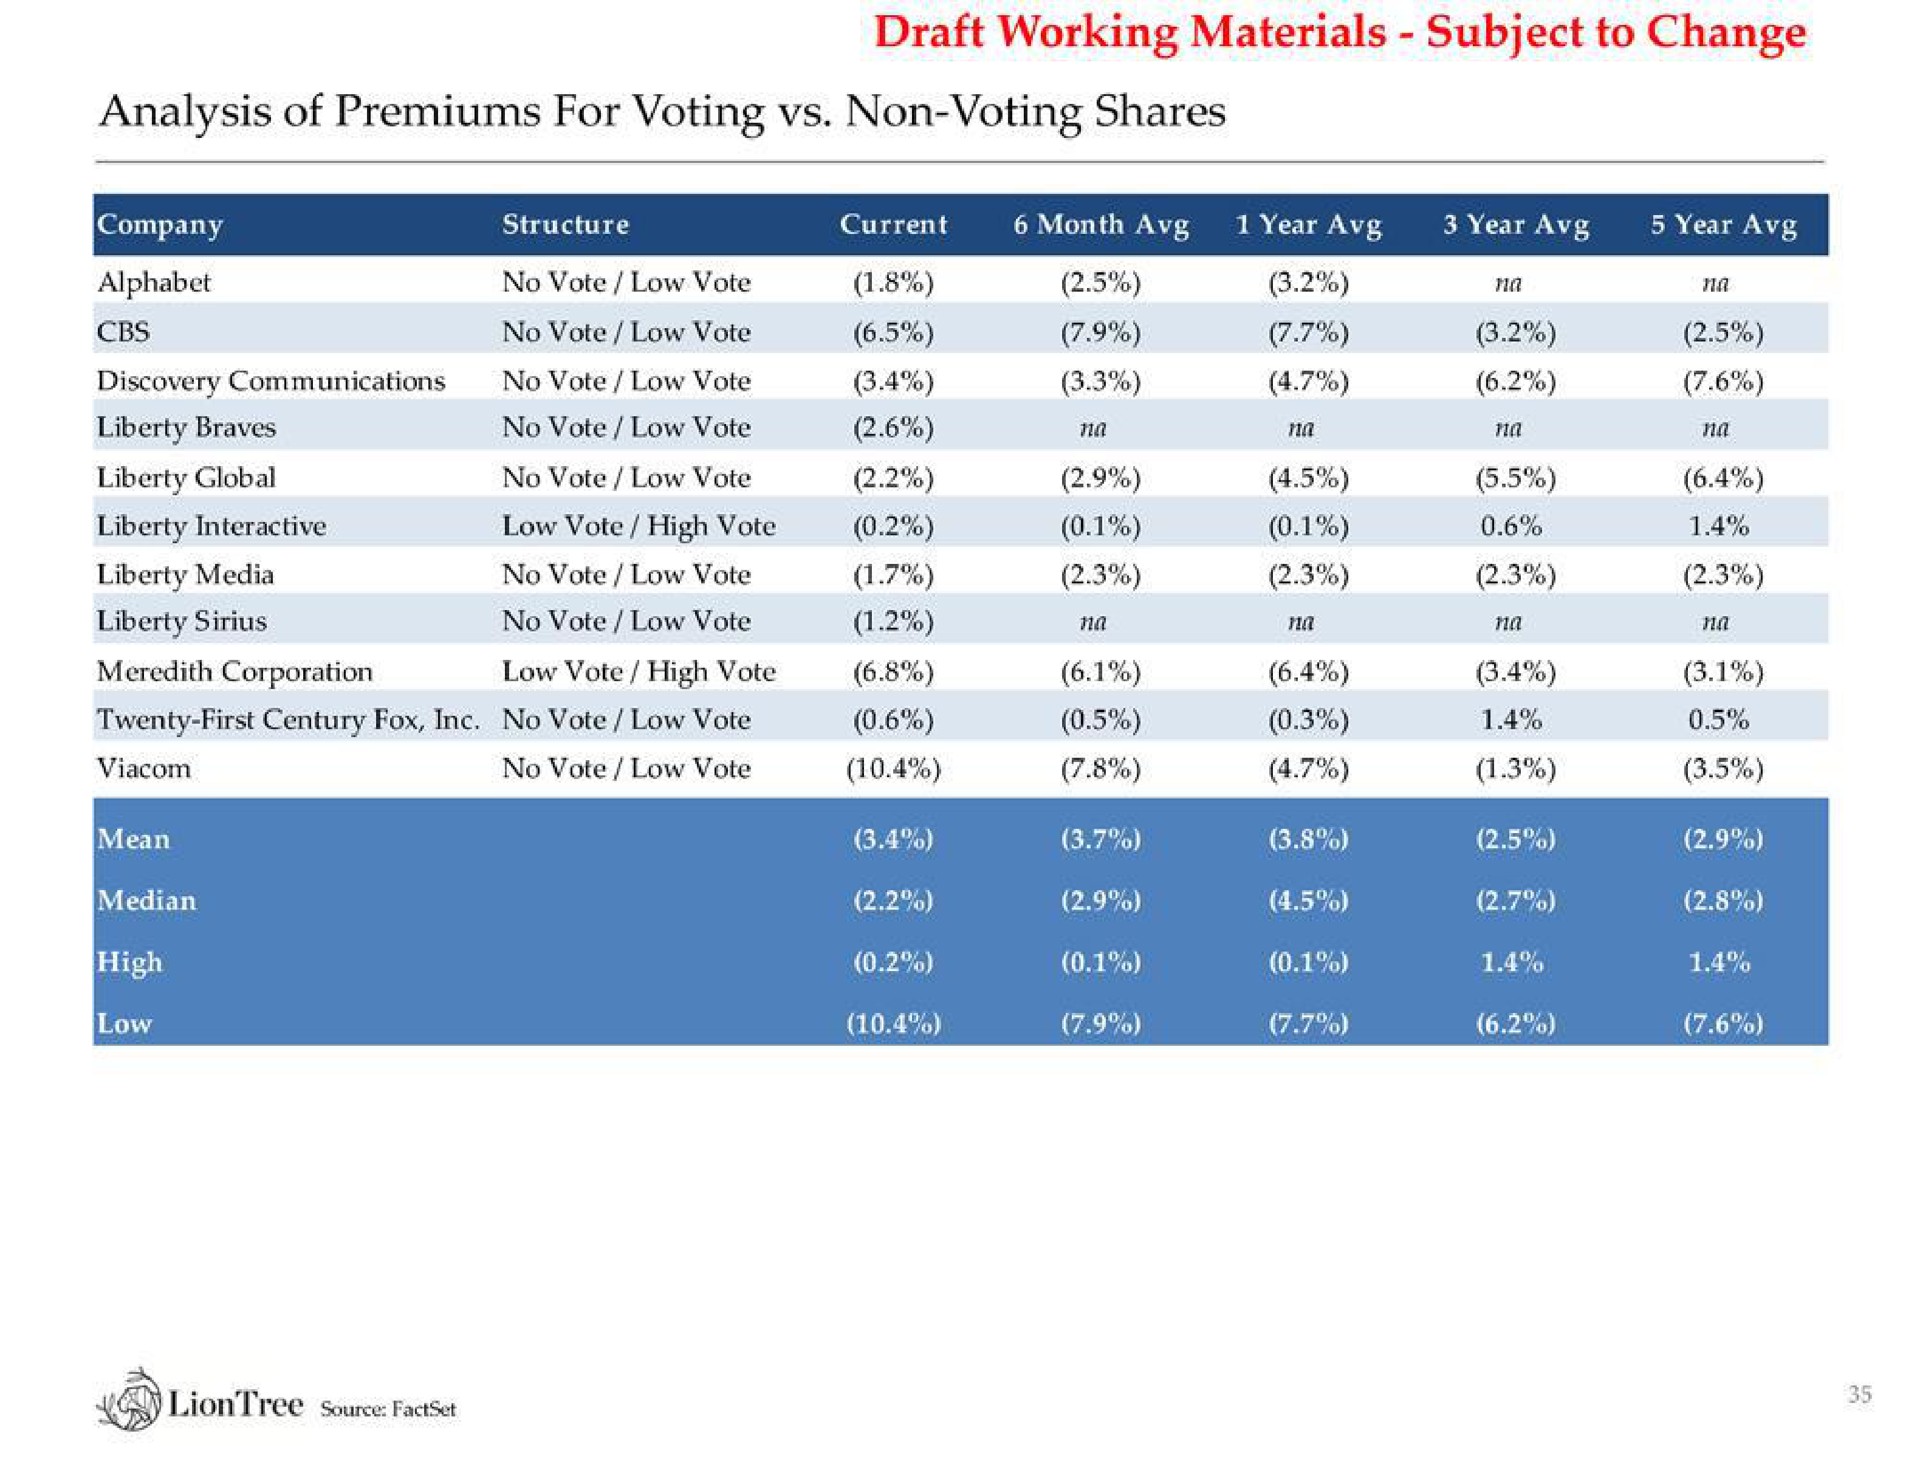 analysis of premiums for voting non voting shares draft working materials subject to change | LionTree